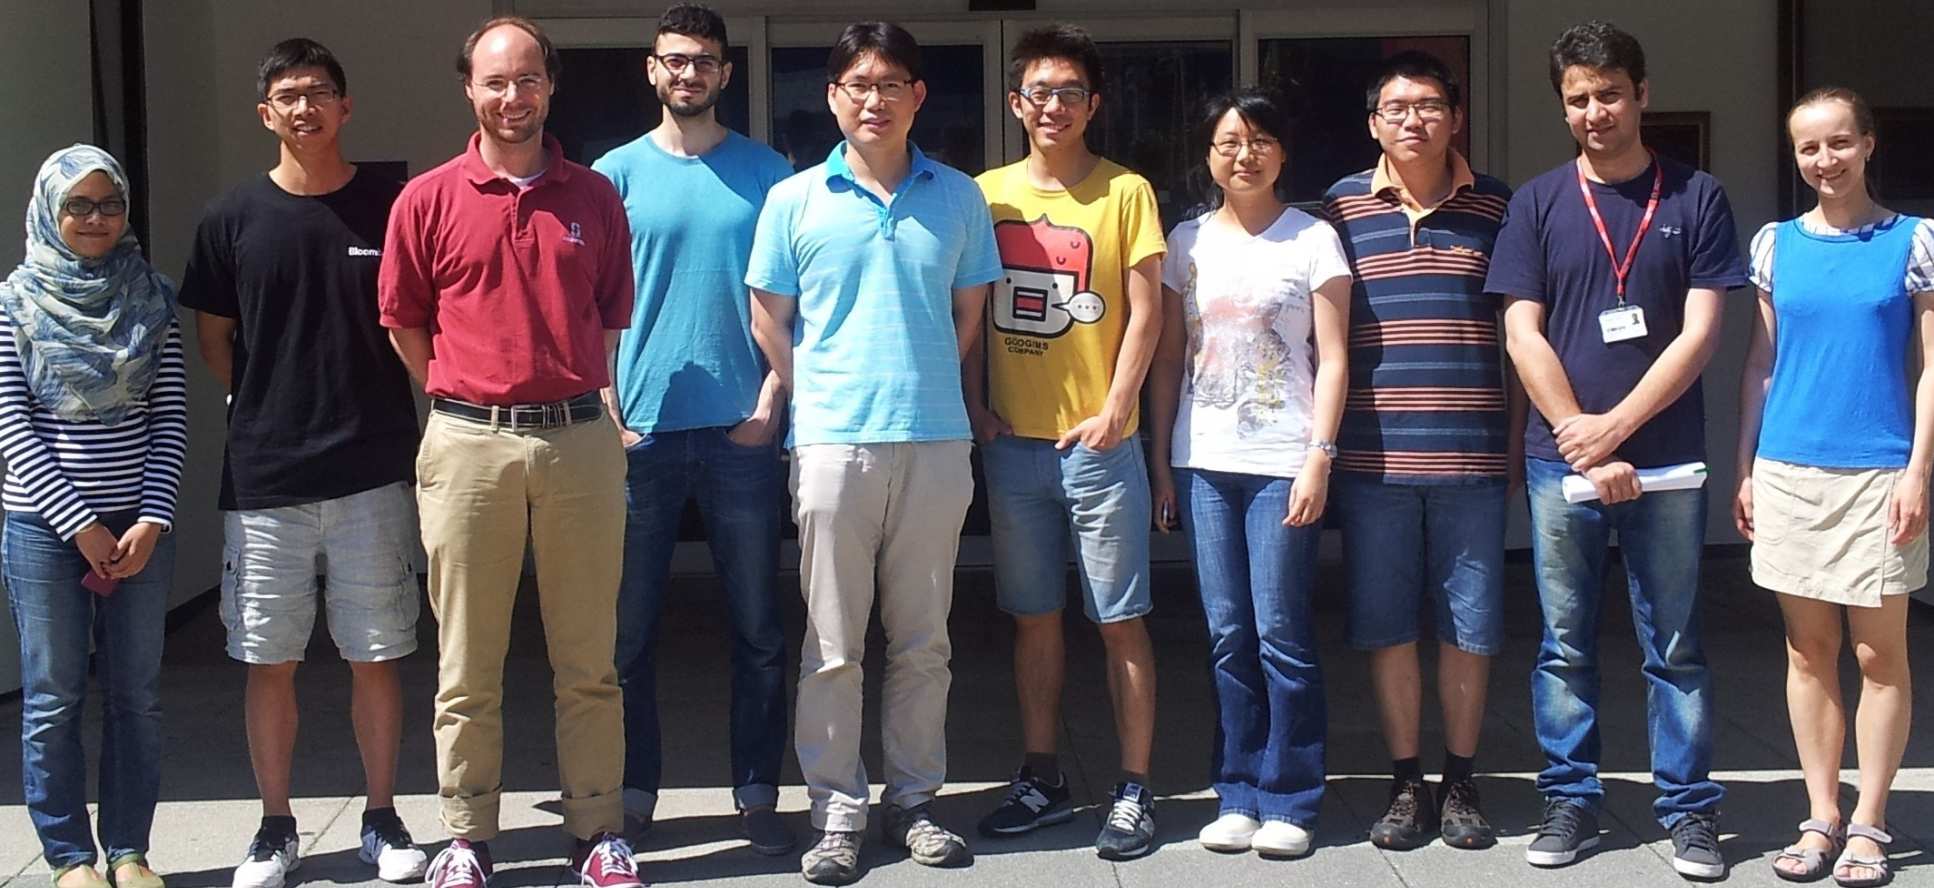 Dr Bruno Clerckx (third from left) and his research group